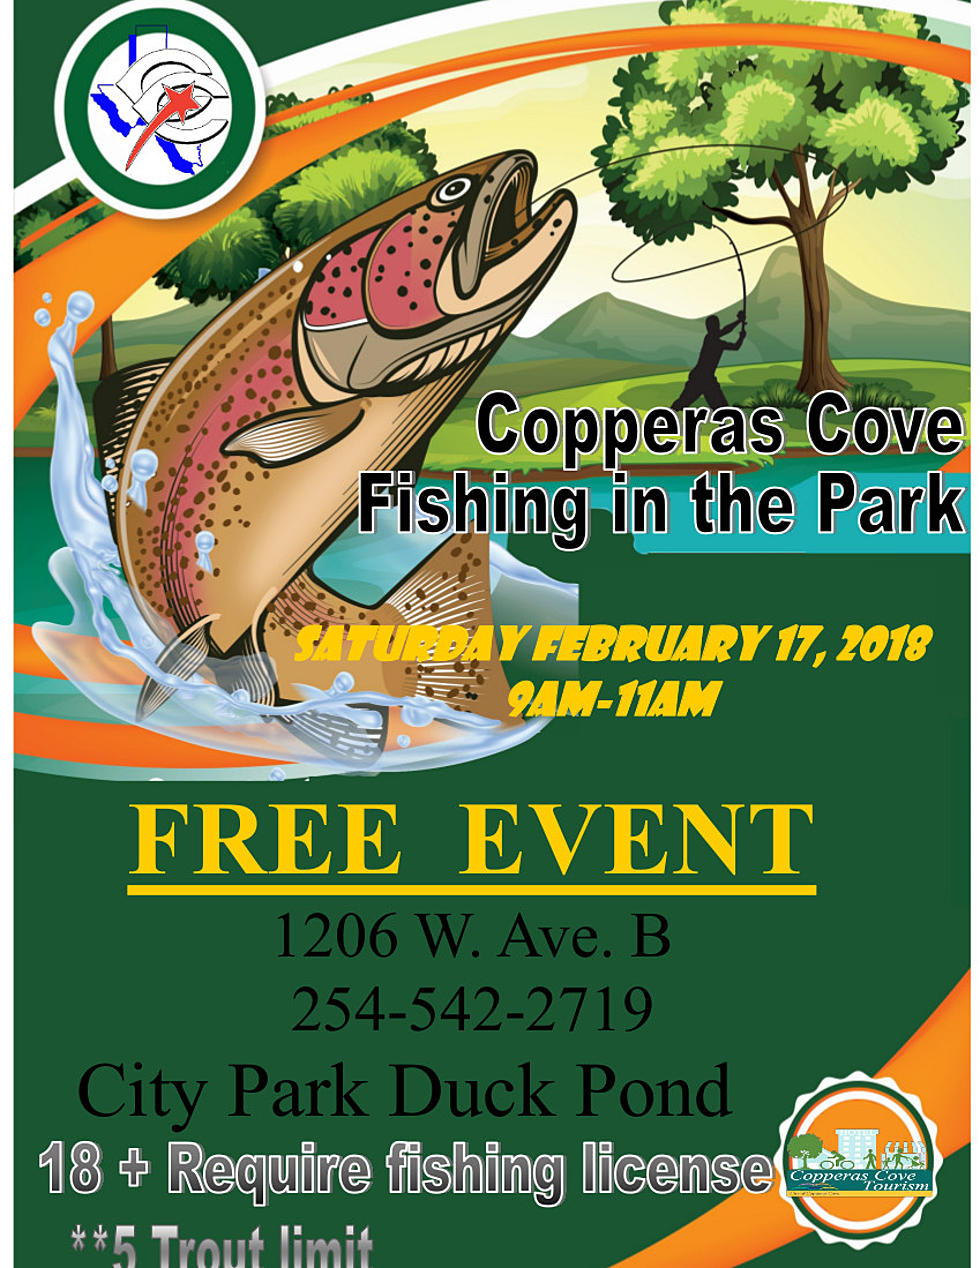 Gone Fishin: Copperas Cove Fishing In The Park Event